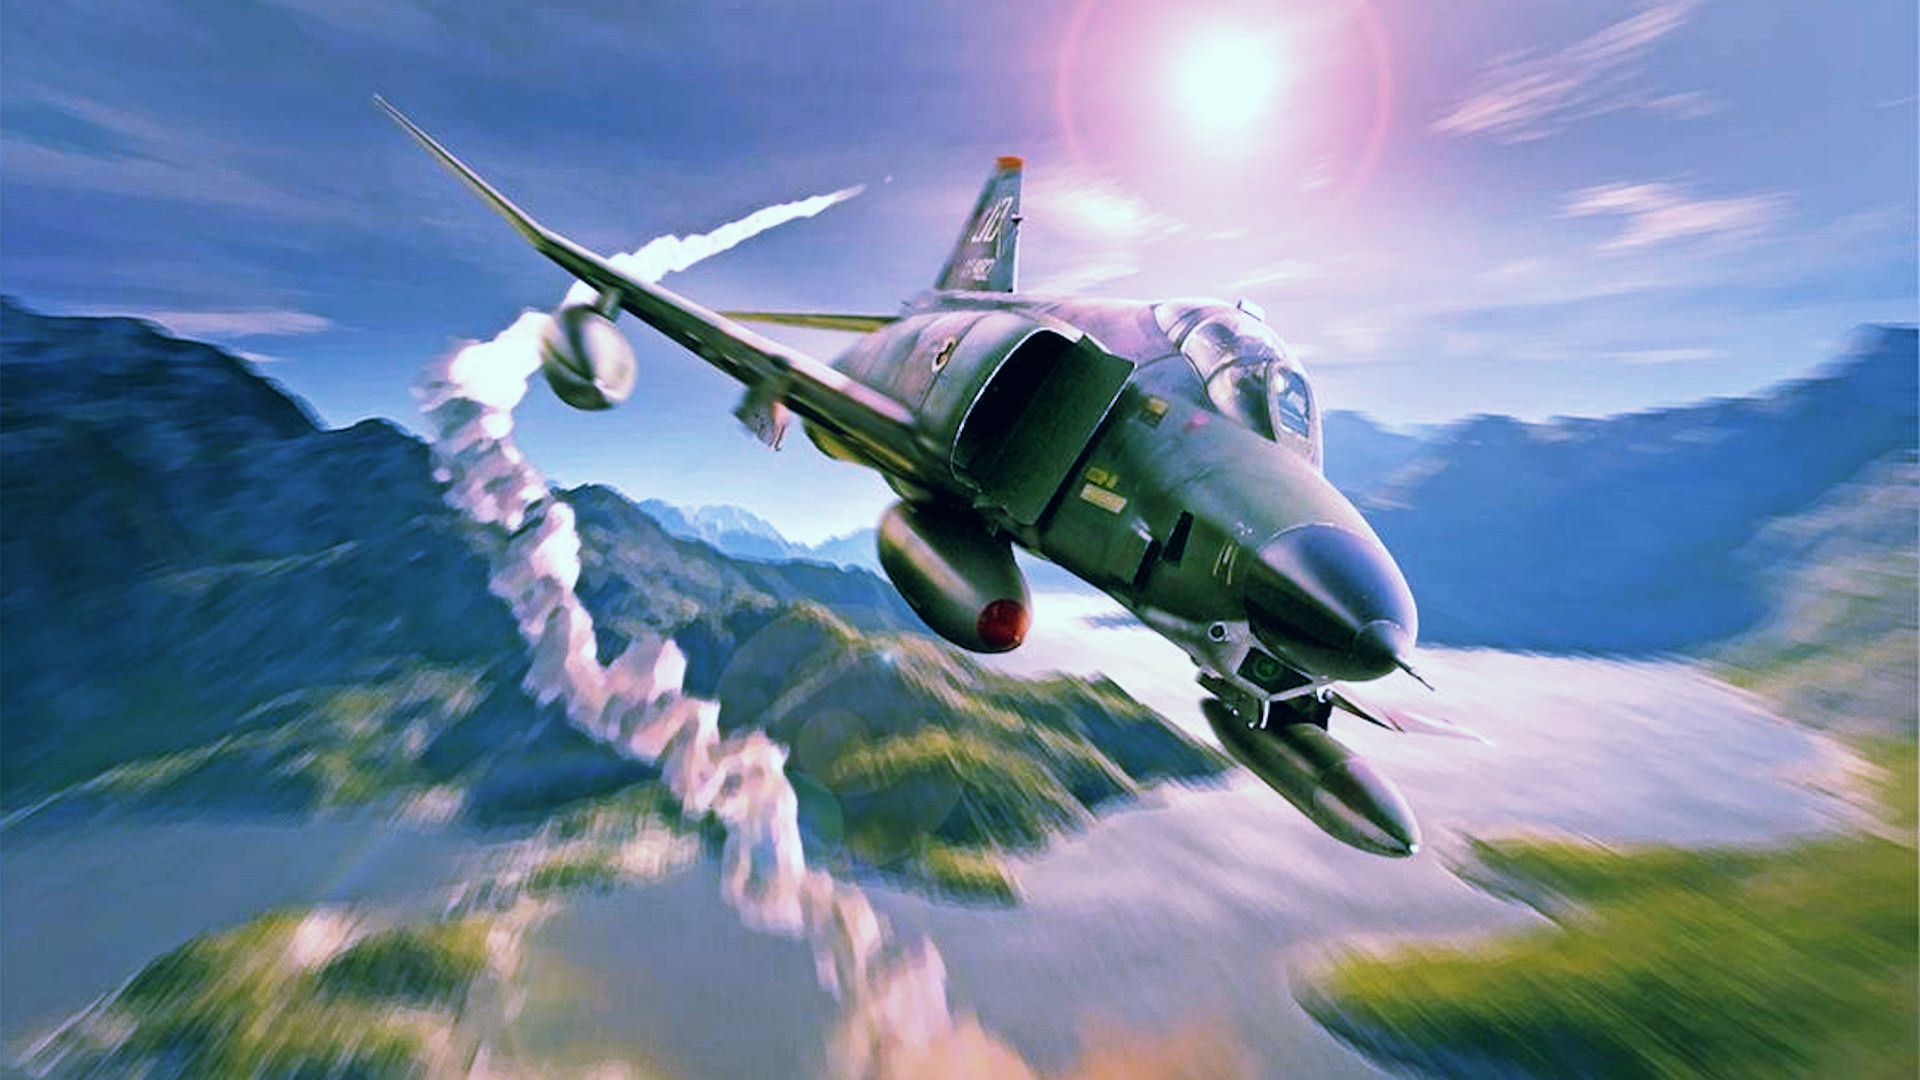 Military Fighter Jet Ride - HD Wallpapers Widescreen - 1920x1080